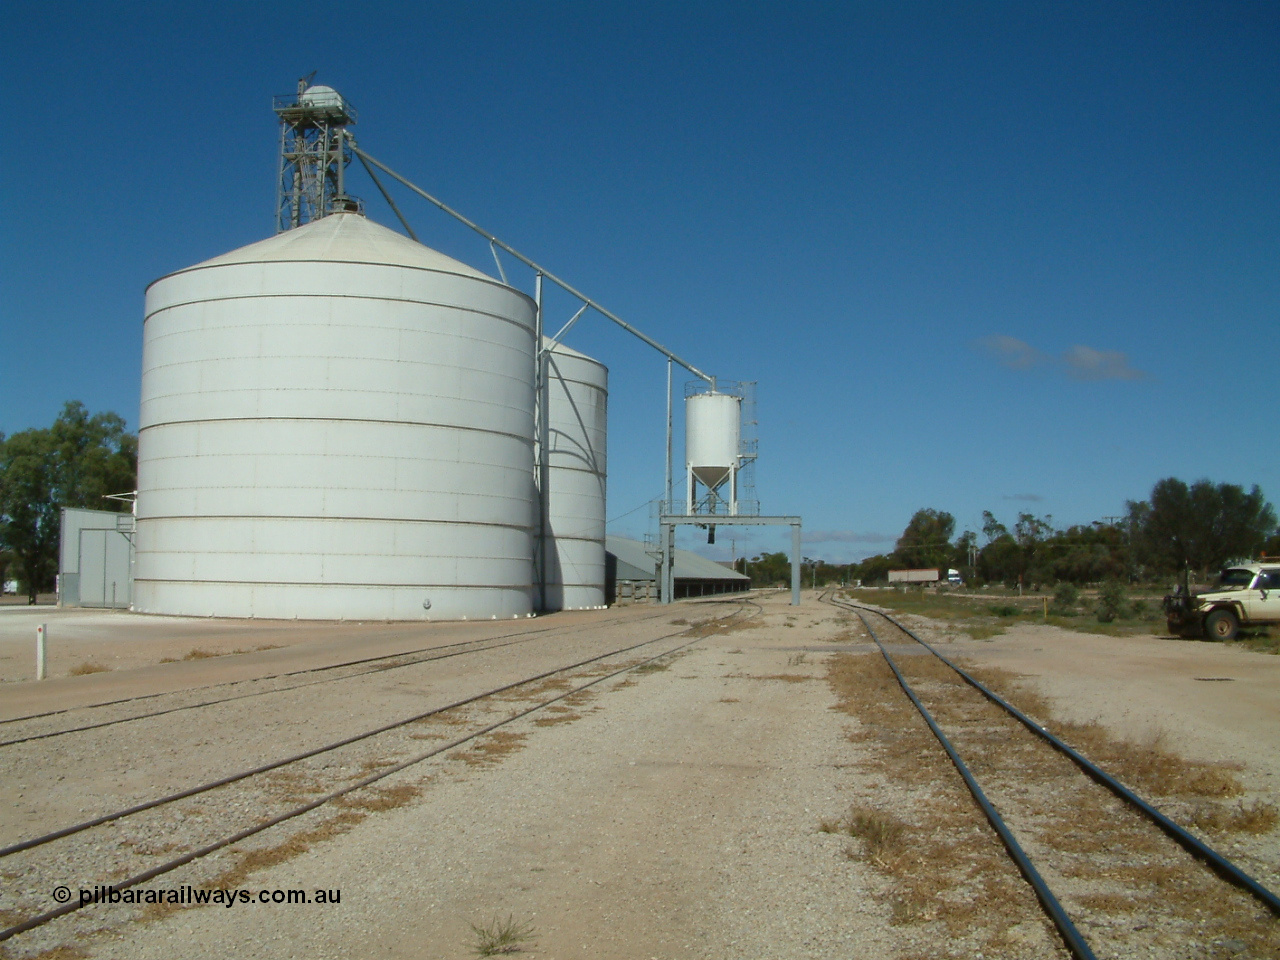 030411 110609
Kimba, view looking south of the Ascom Jumbo style silo complex, truck discharge on the left, outloading spout and silo over rail, horizontal bunker behind.
